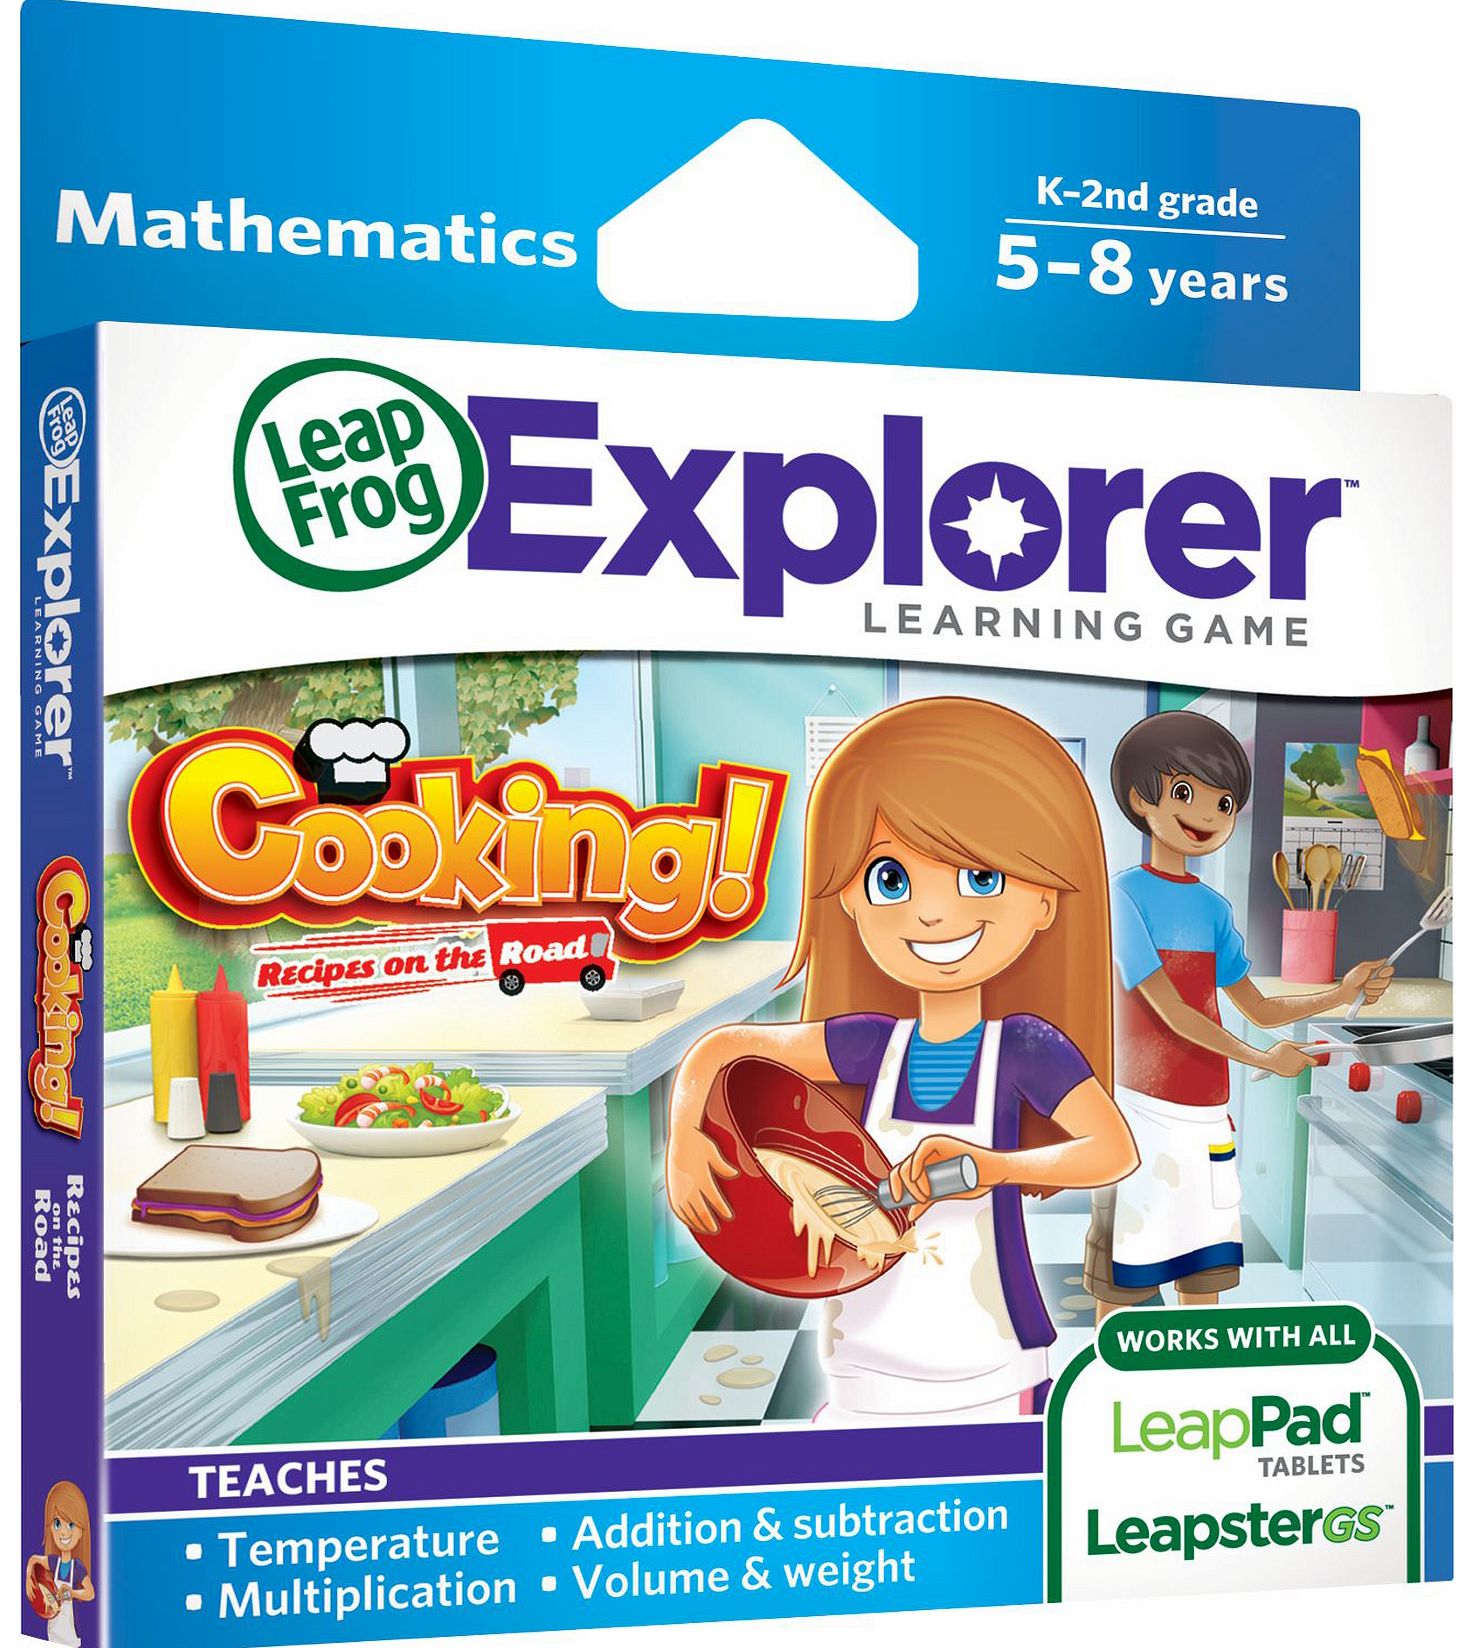 Explorer Learning Game - Cooking! Recipes on the